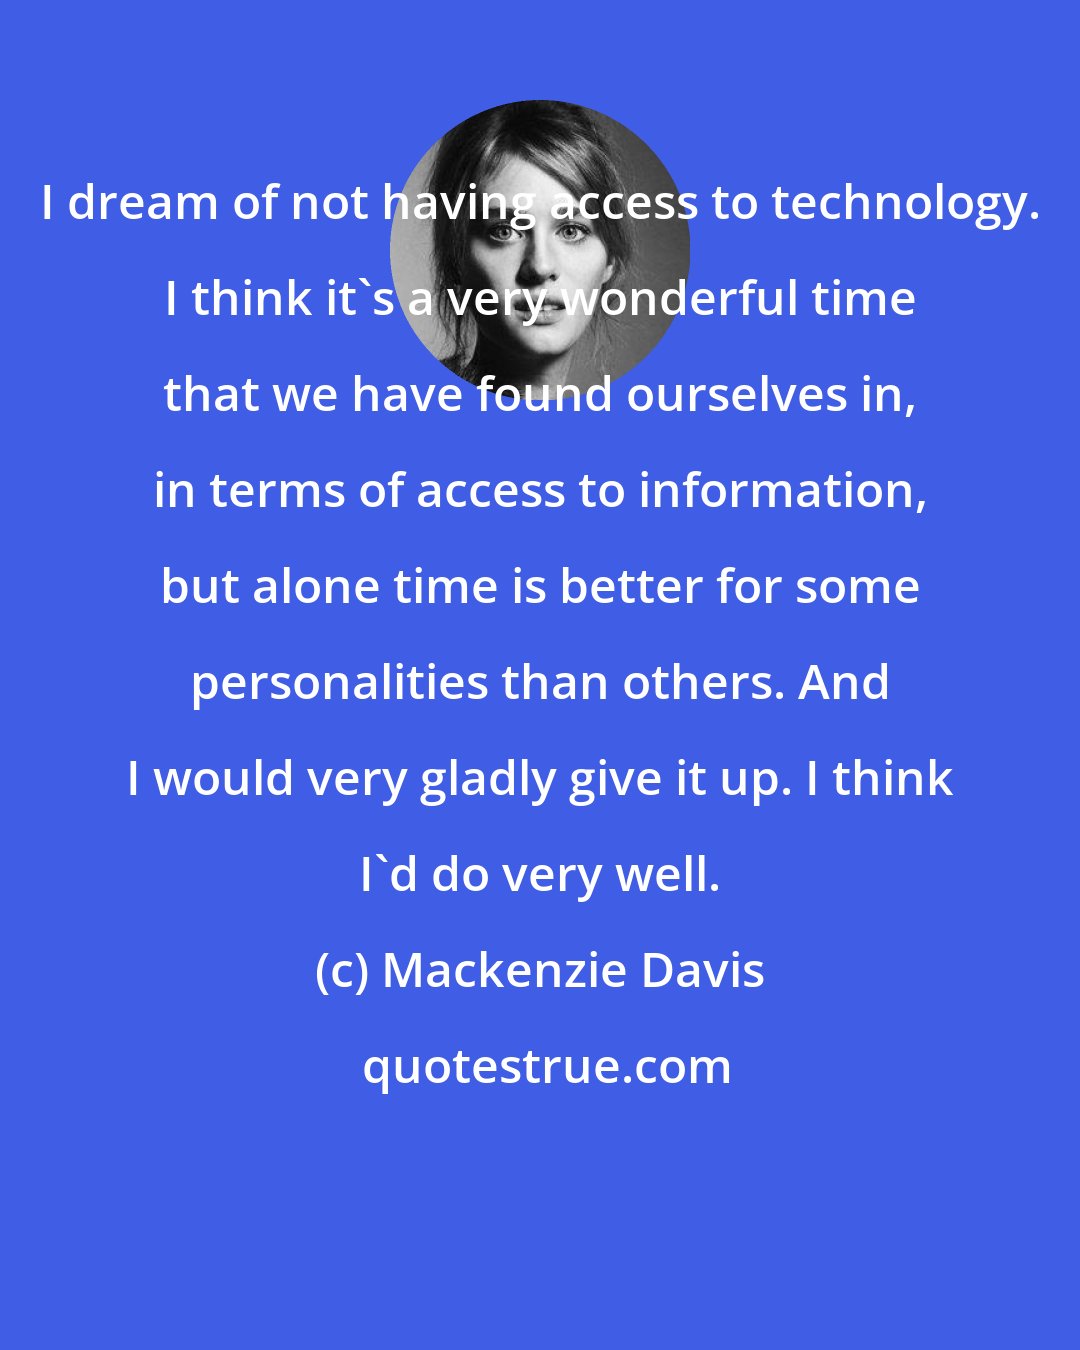 Mackenzie Davis: I dream of not having access to technology. I think it's a very wonderful time that we have found ourselves in, in terms of access to information, but alone time is better for some personalities than others. And I would very gladly give it up. I think I'd do very well.